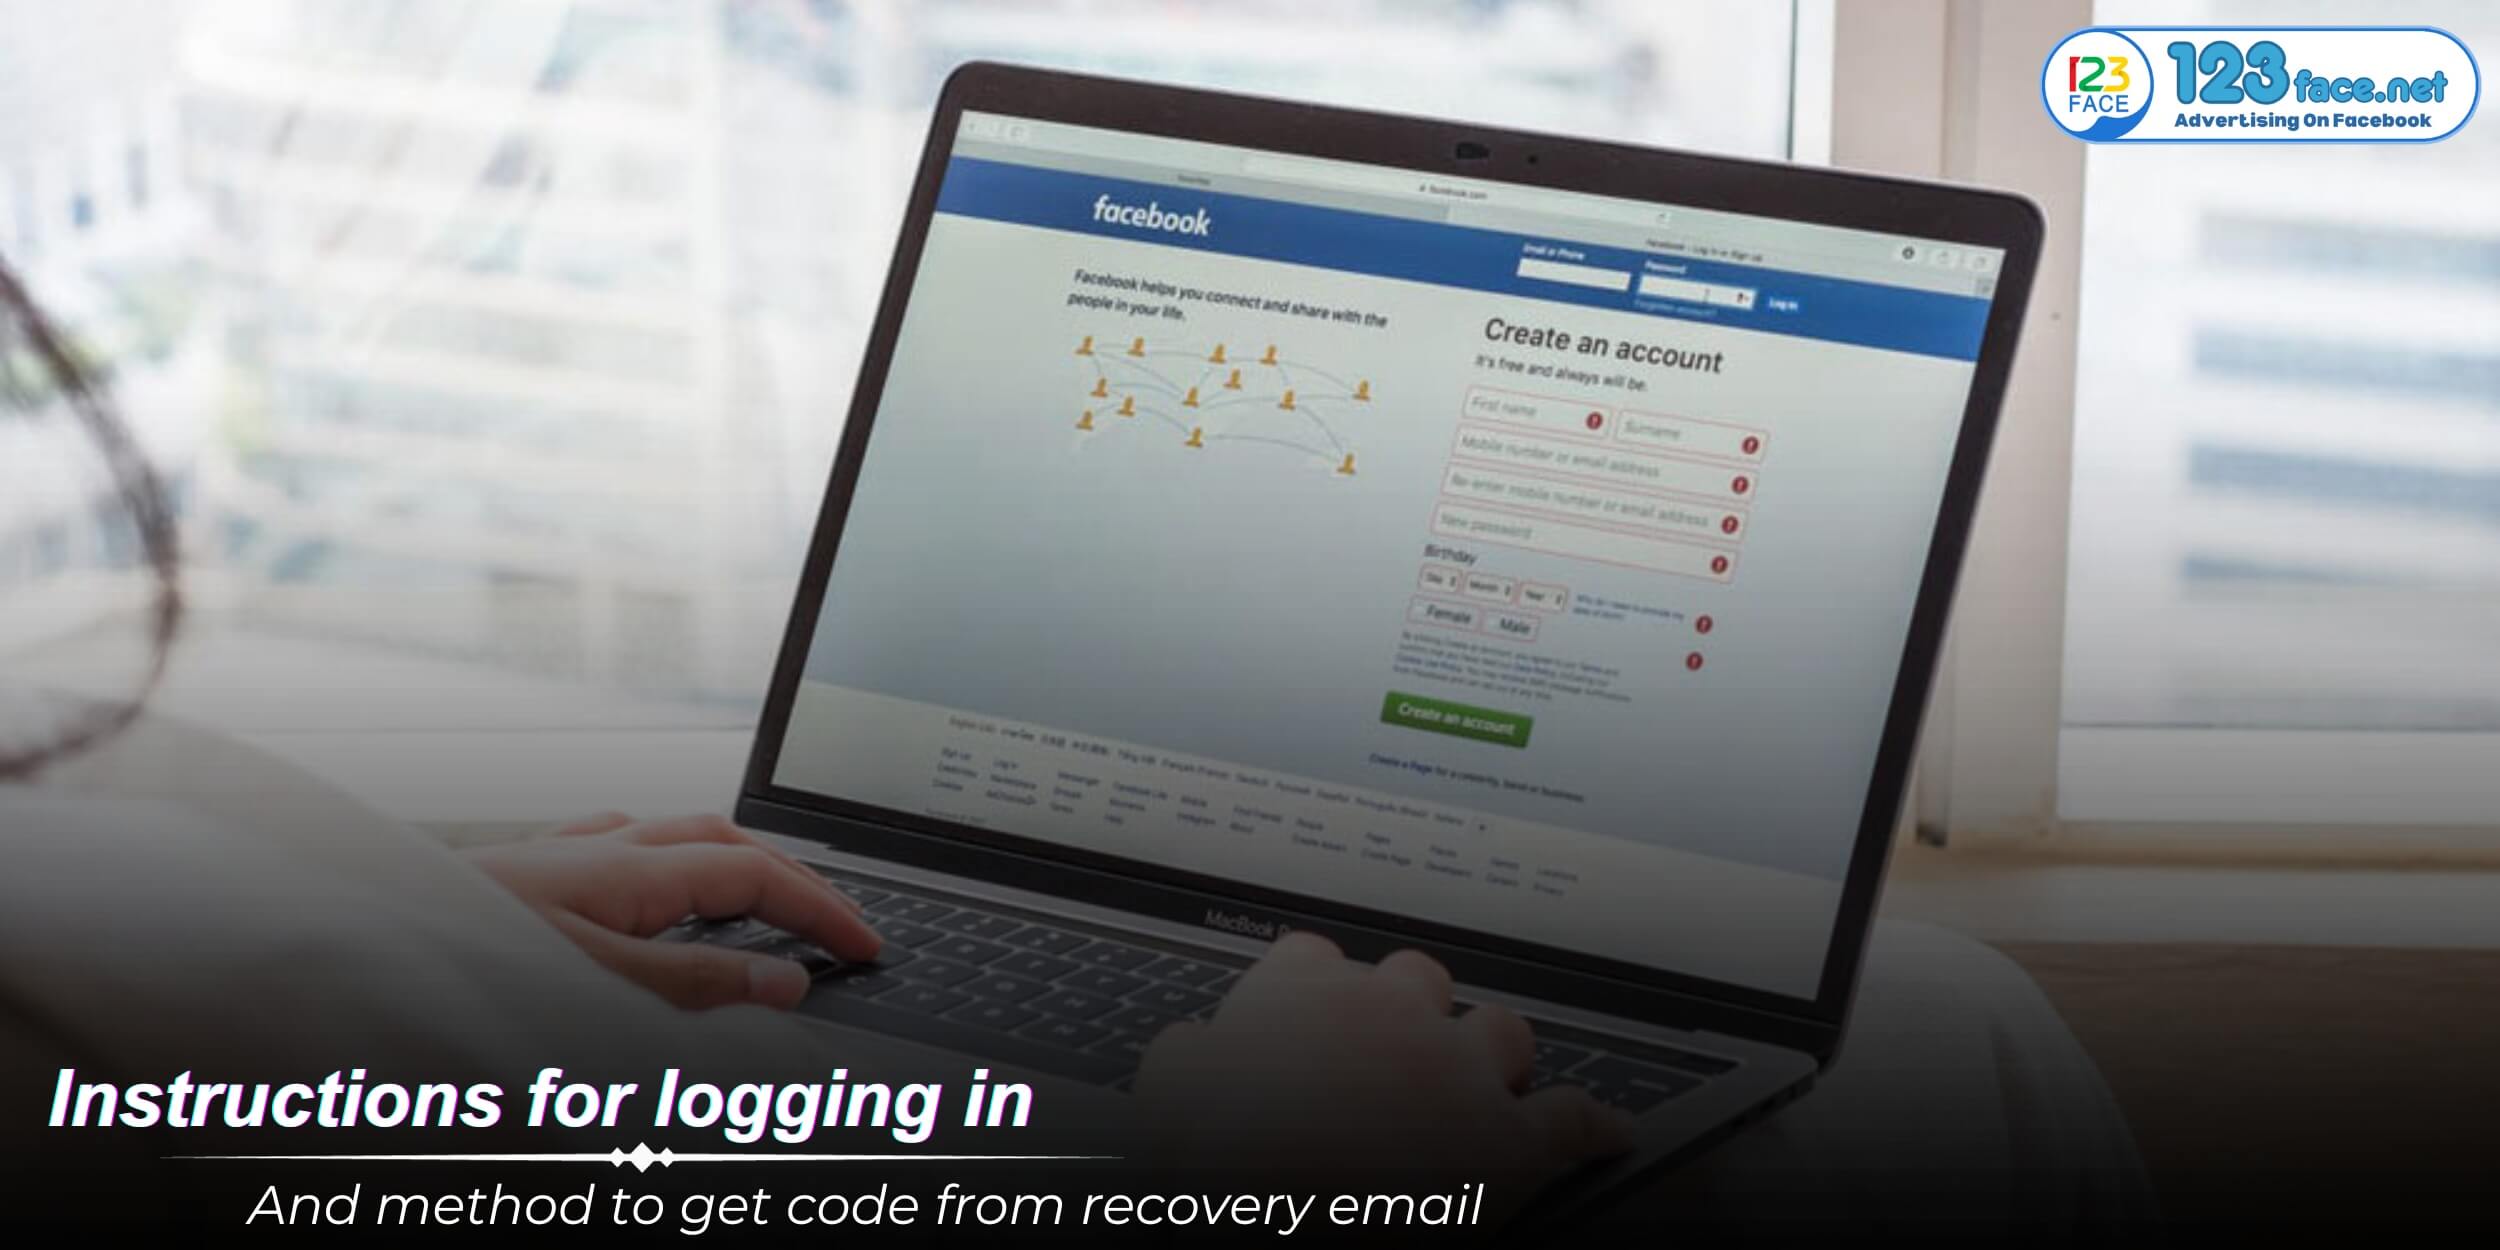 Instructions for logging in to Facebook, hotmail, and getting recovery email code (GETNADA NEW)